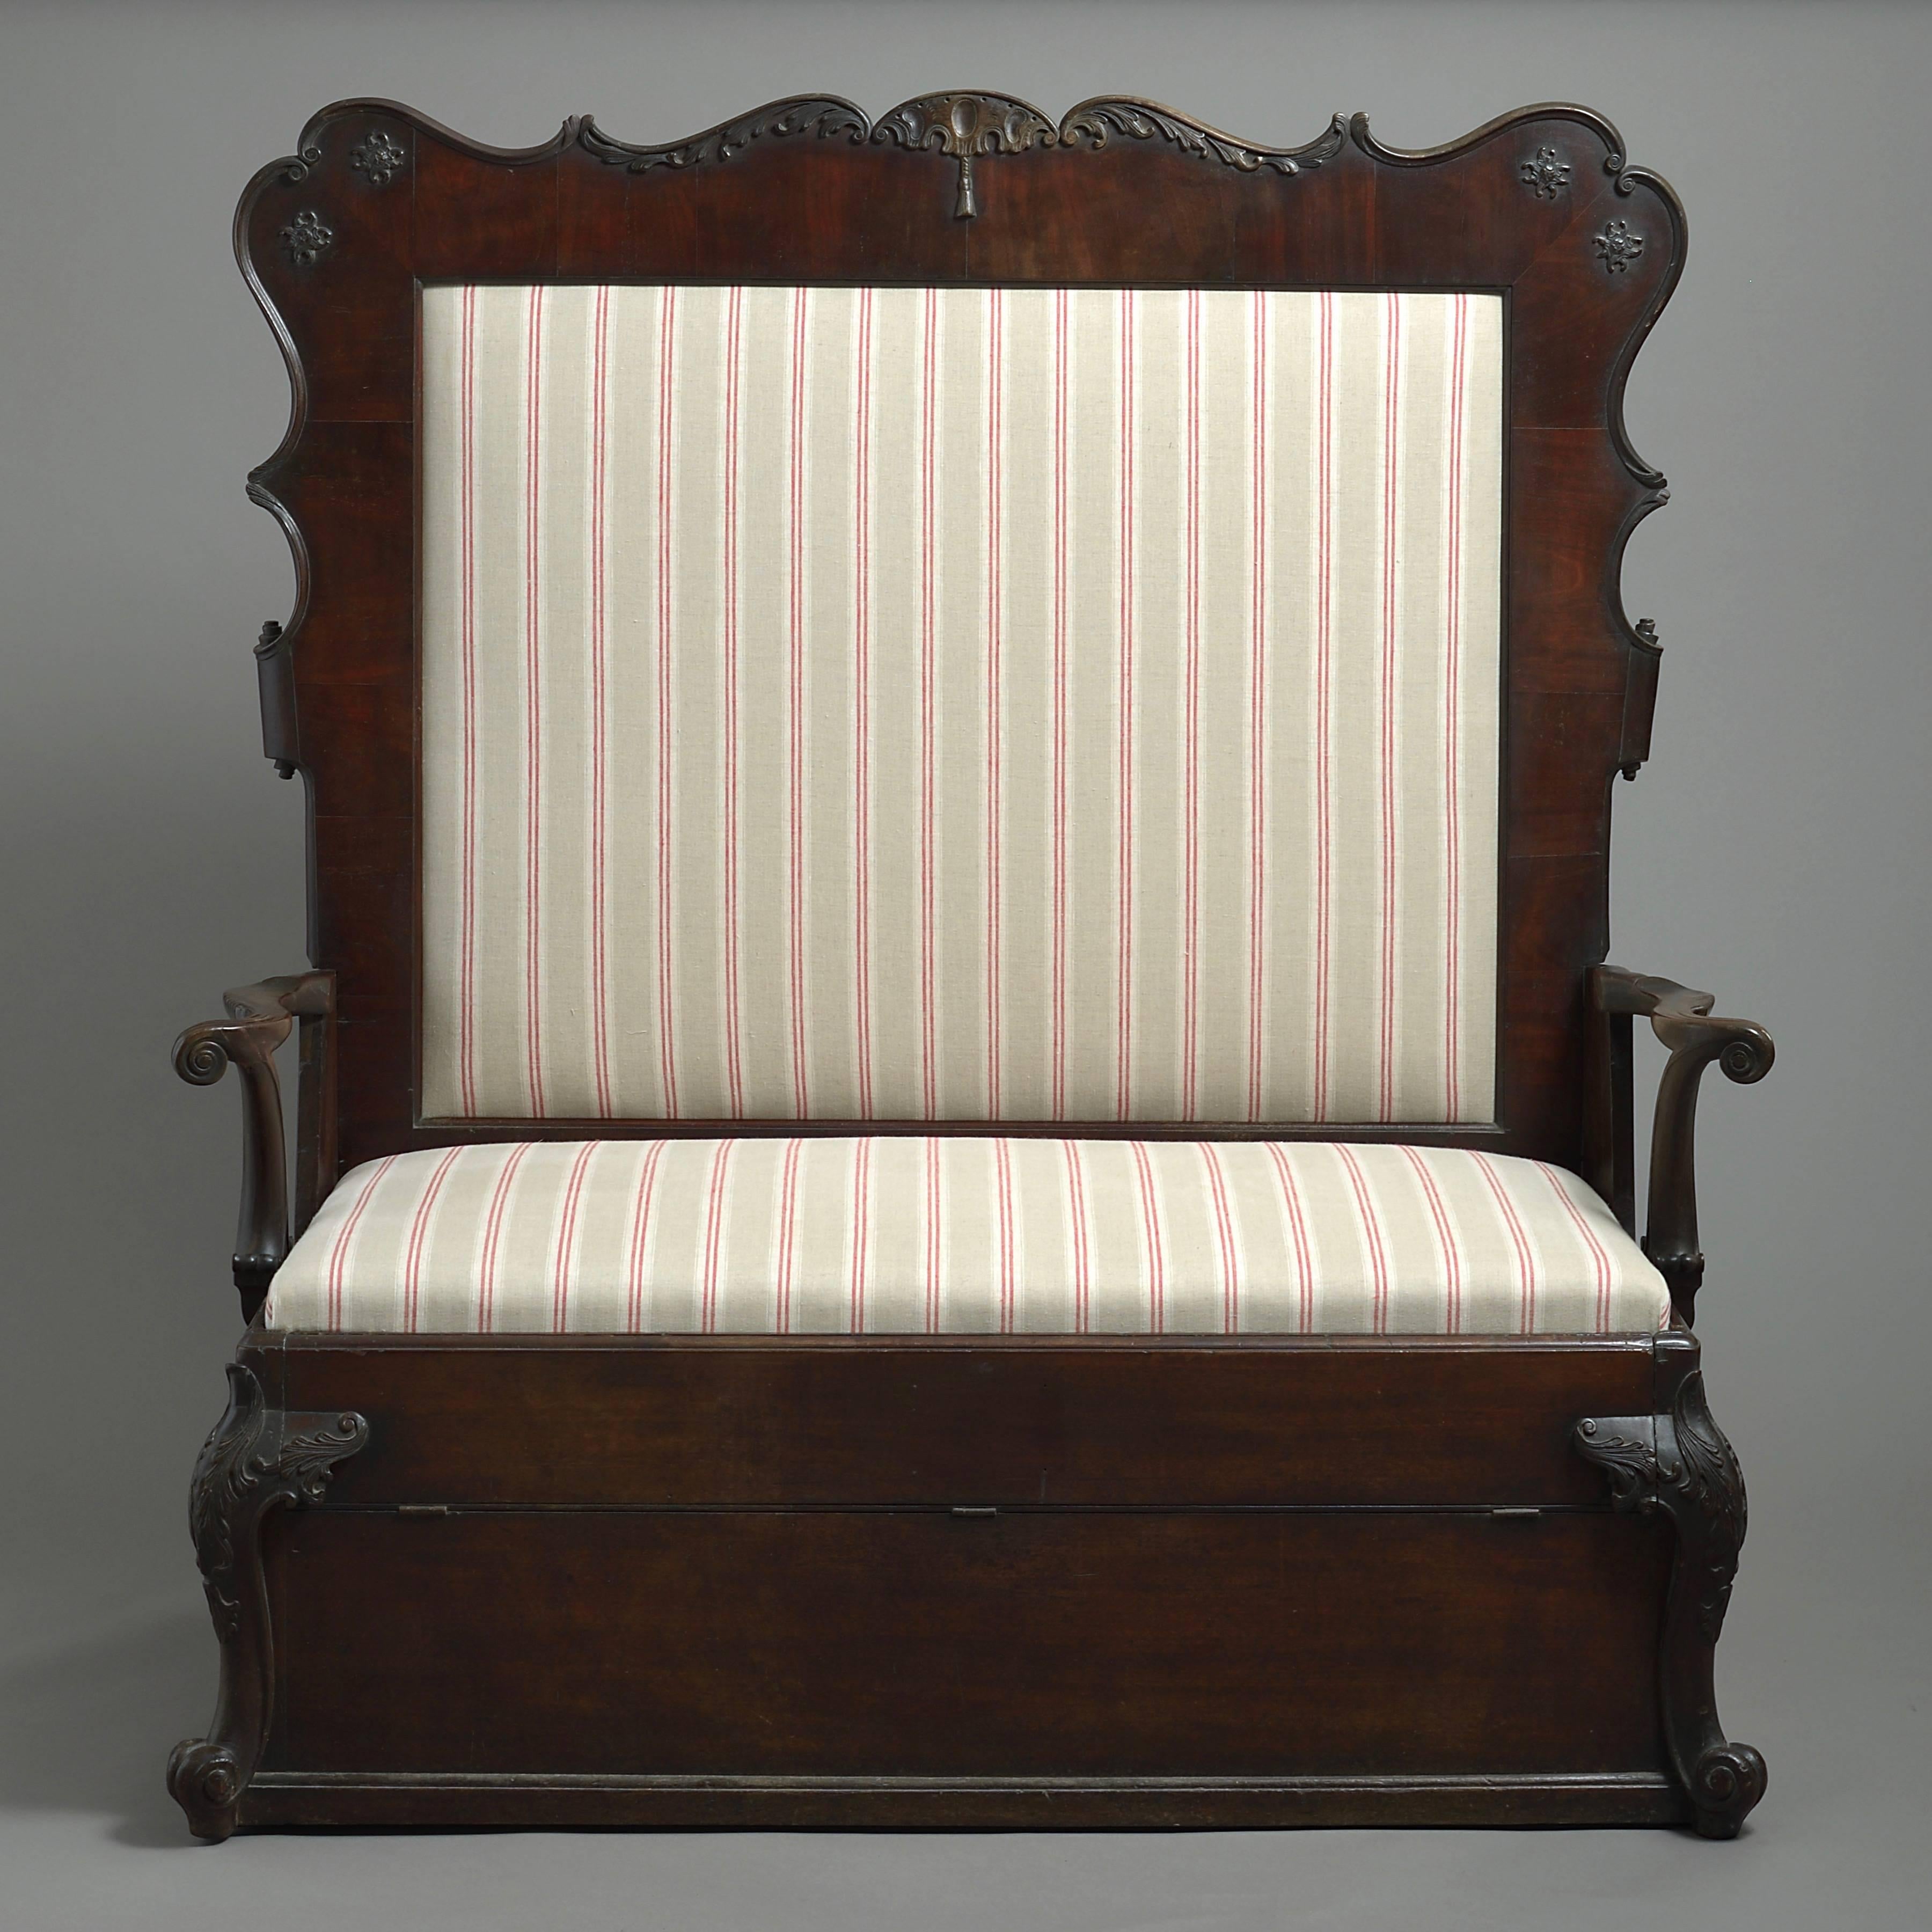 An Irish George II mahogany settee, circa 1750.

Formerly a settee-bed, the bed mechanism now missing.